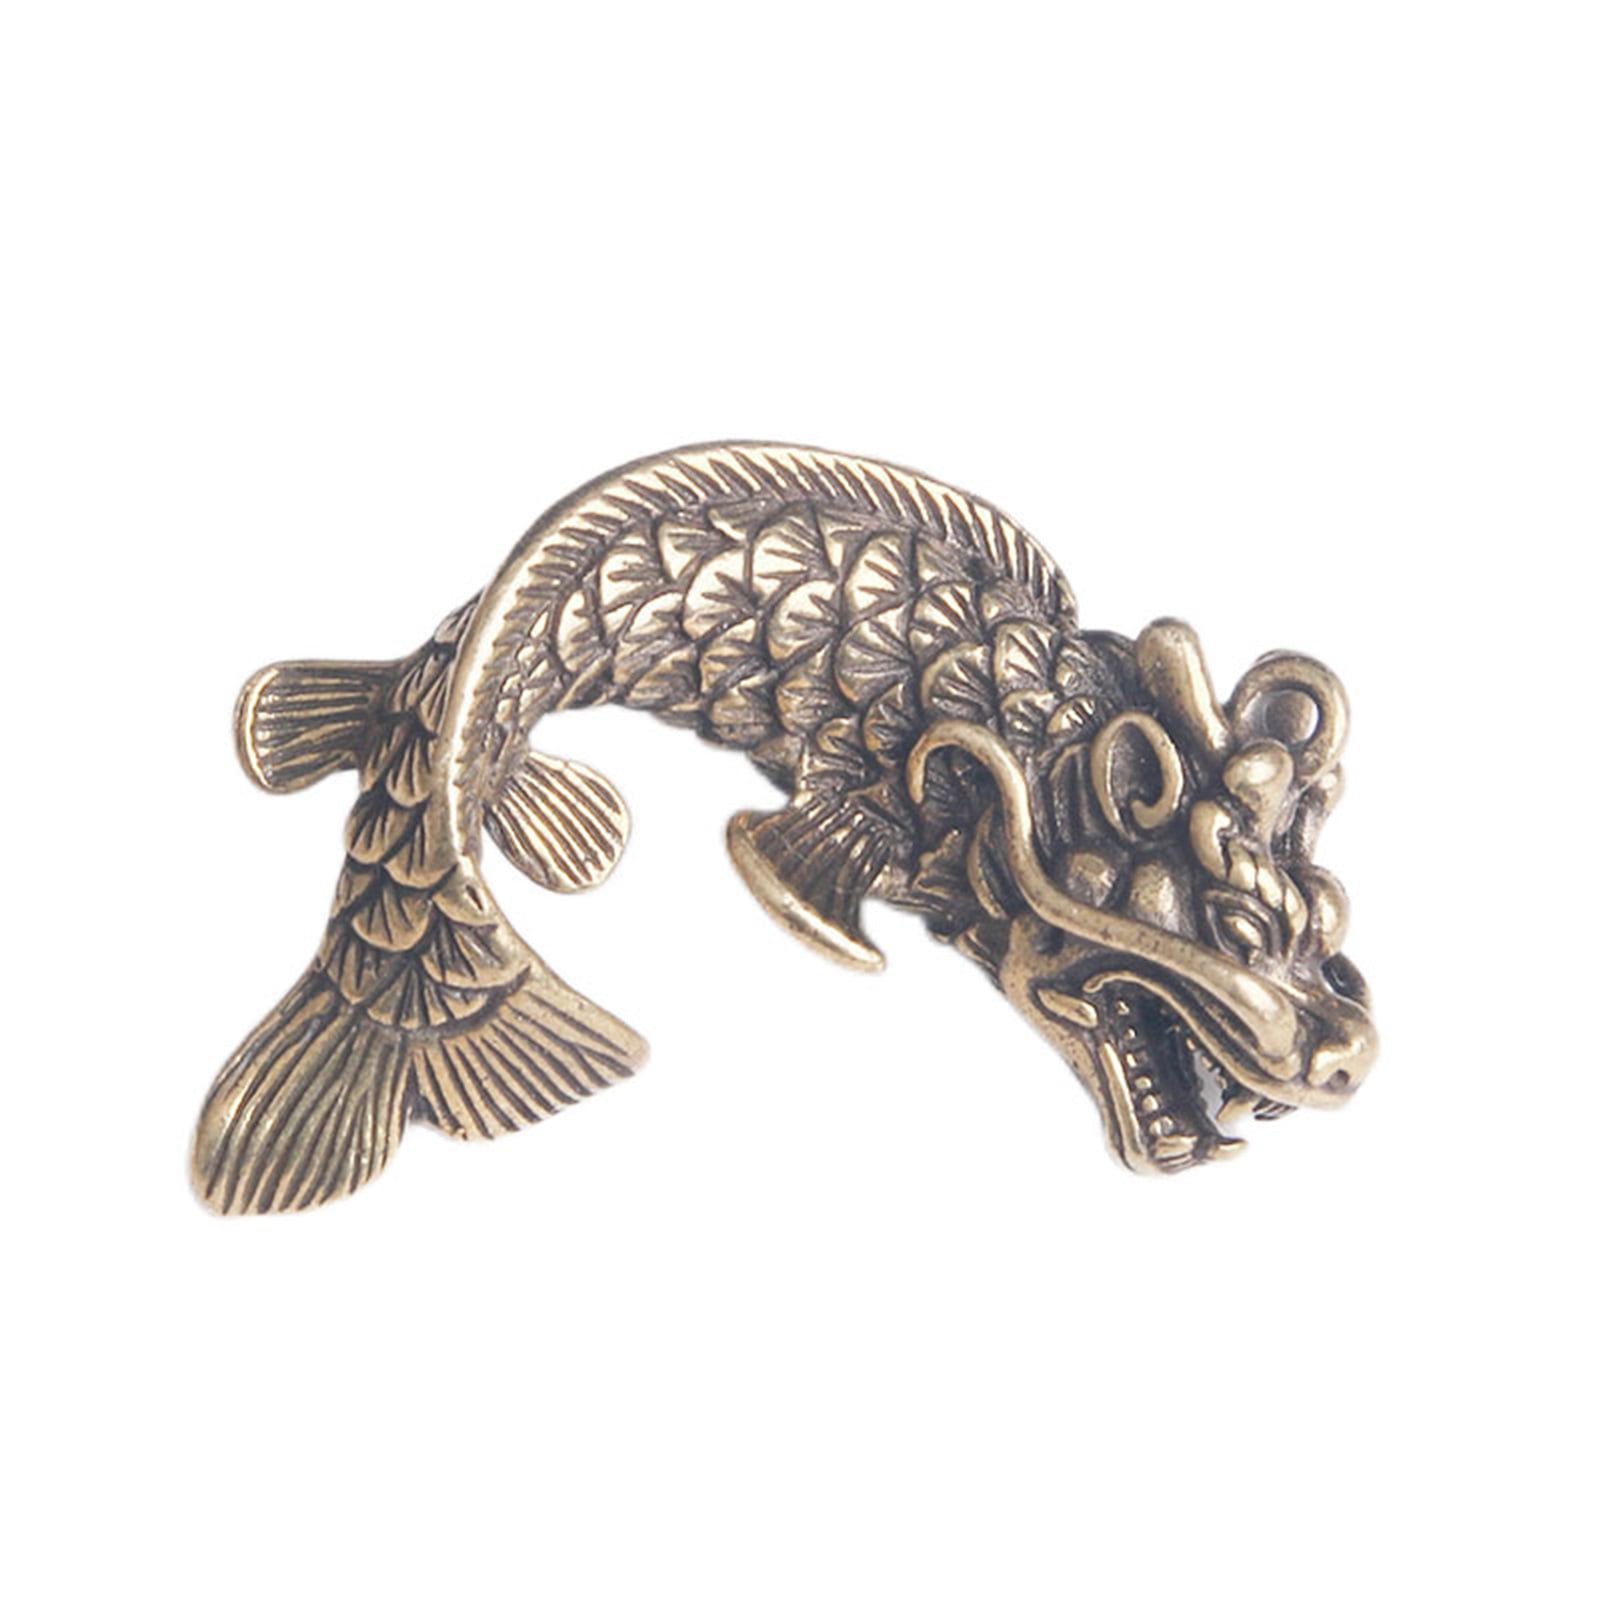 Frogued Artistic Key Charm Sophisticated Texture Copper Vividly Engraved 3D  Dragon Fish Ornament for Home